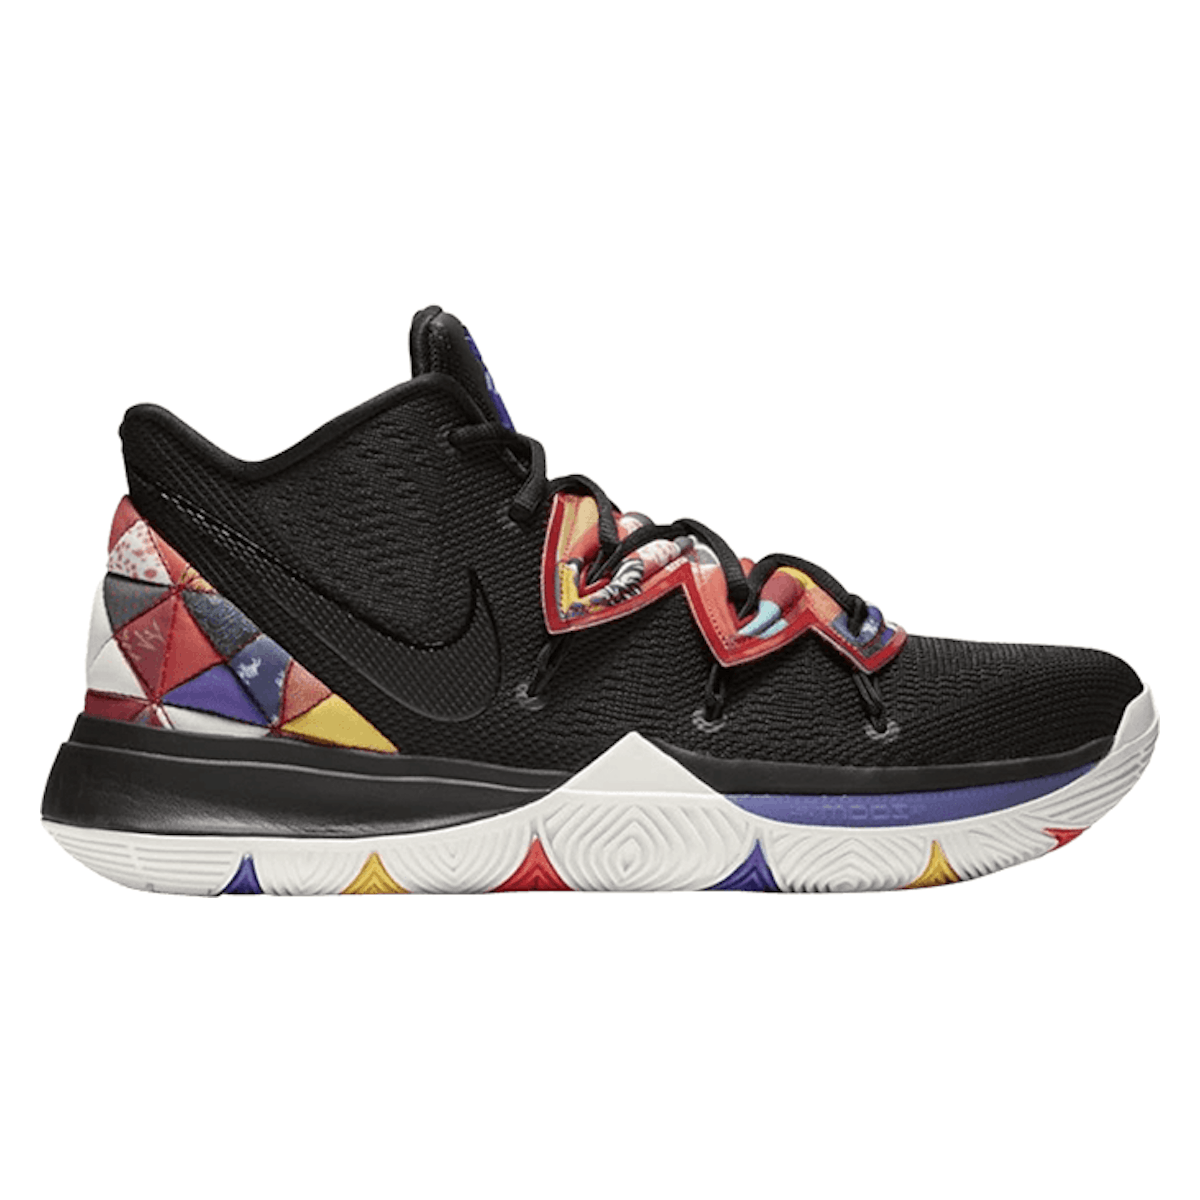 Nike Kyrie 5 "Chinese New Year" 2019